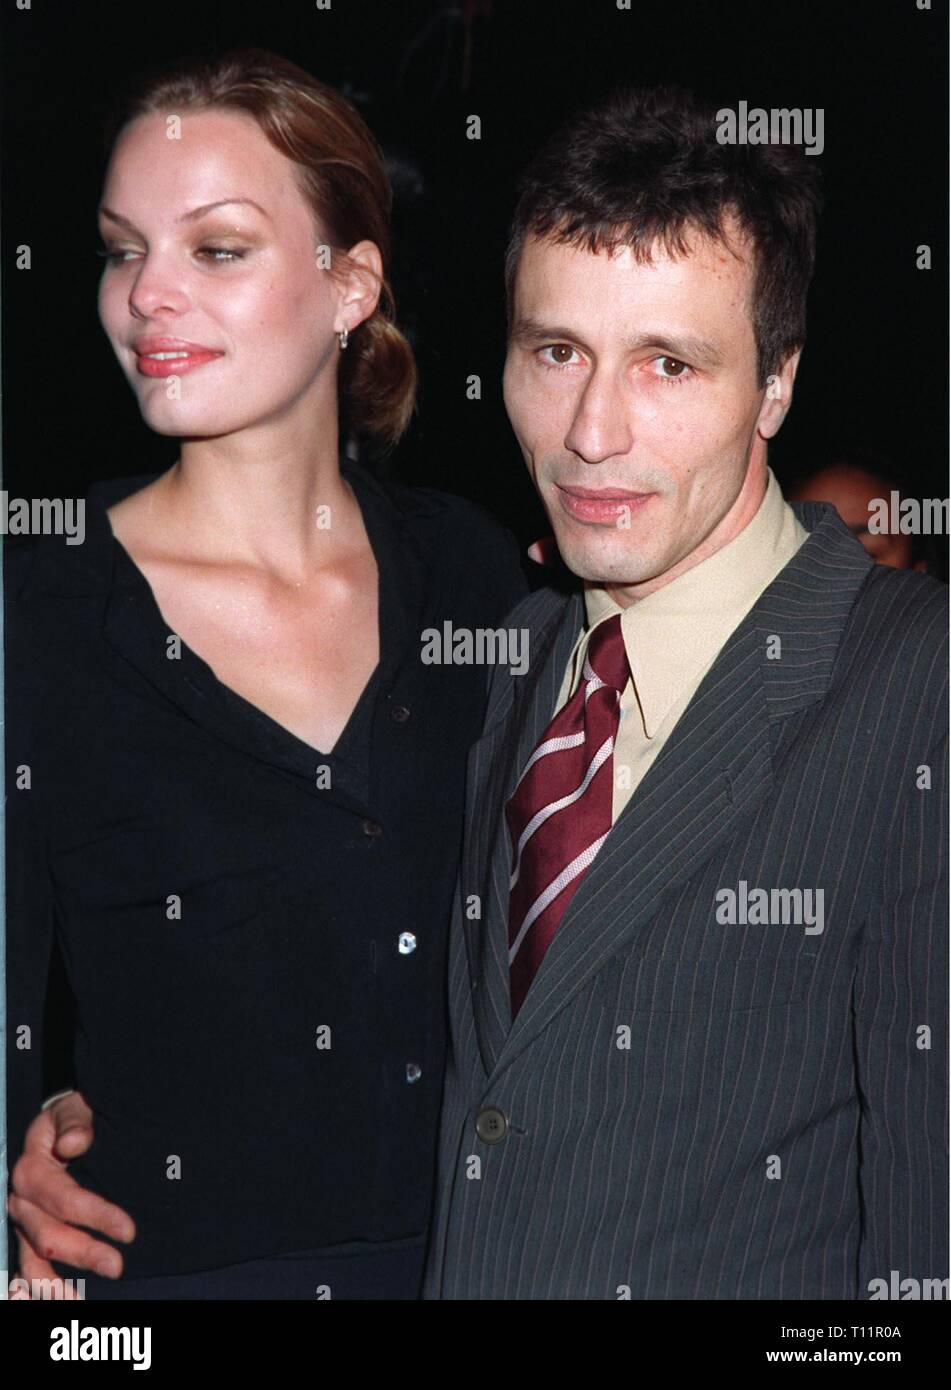 LOS ANGELES, CA. November 21, 1997: Actor Michael Wincott & date at premiere of his new movie, 'Alien Resurrection,' in Los Angeles. Stock Photo